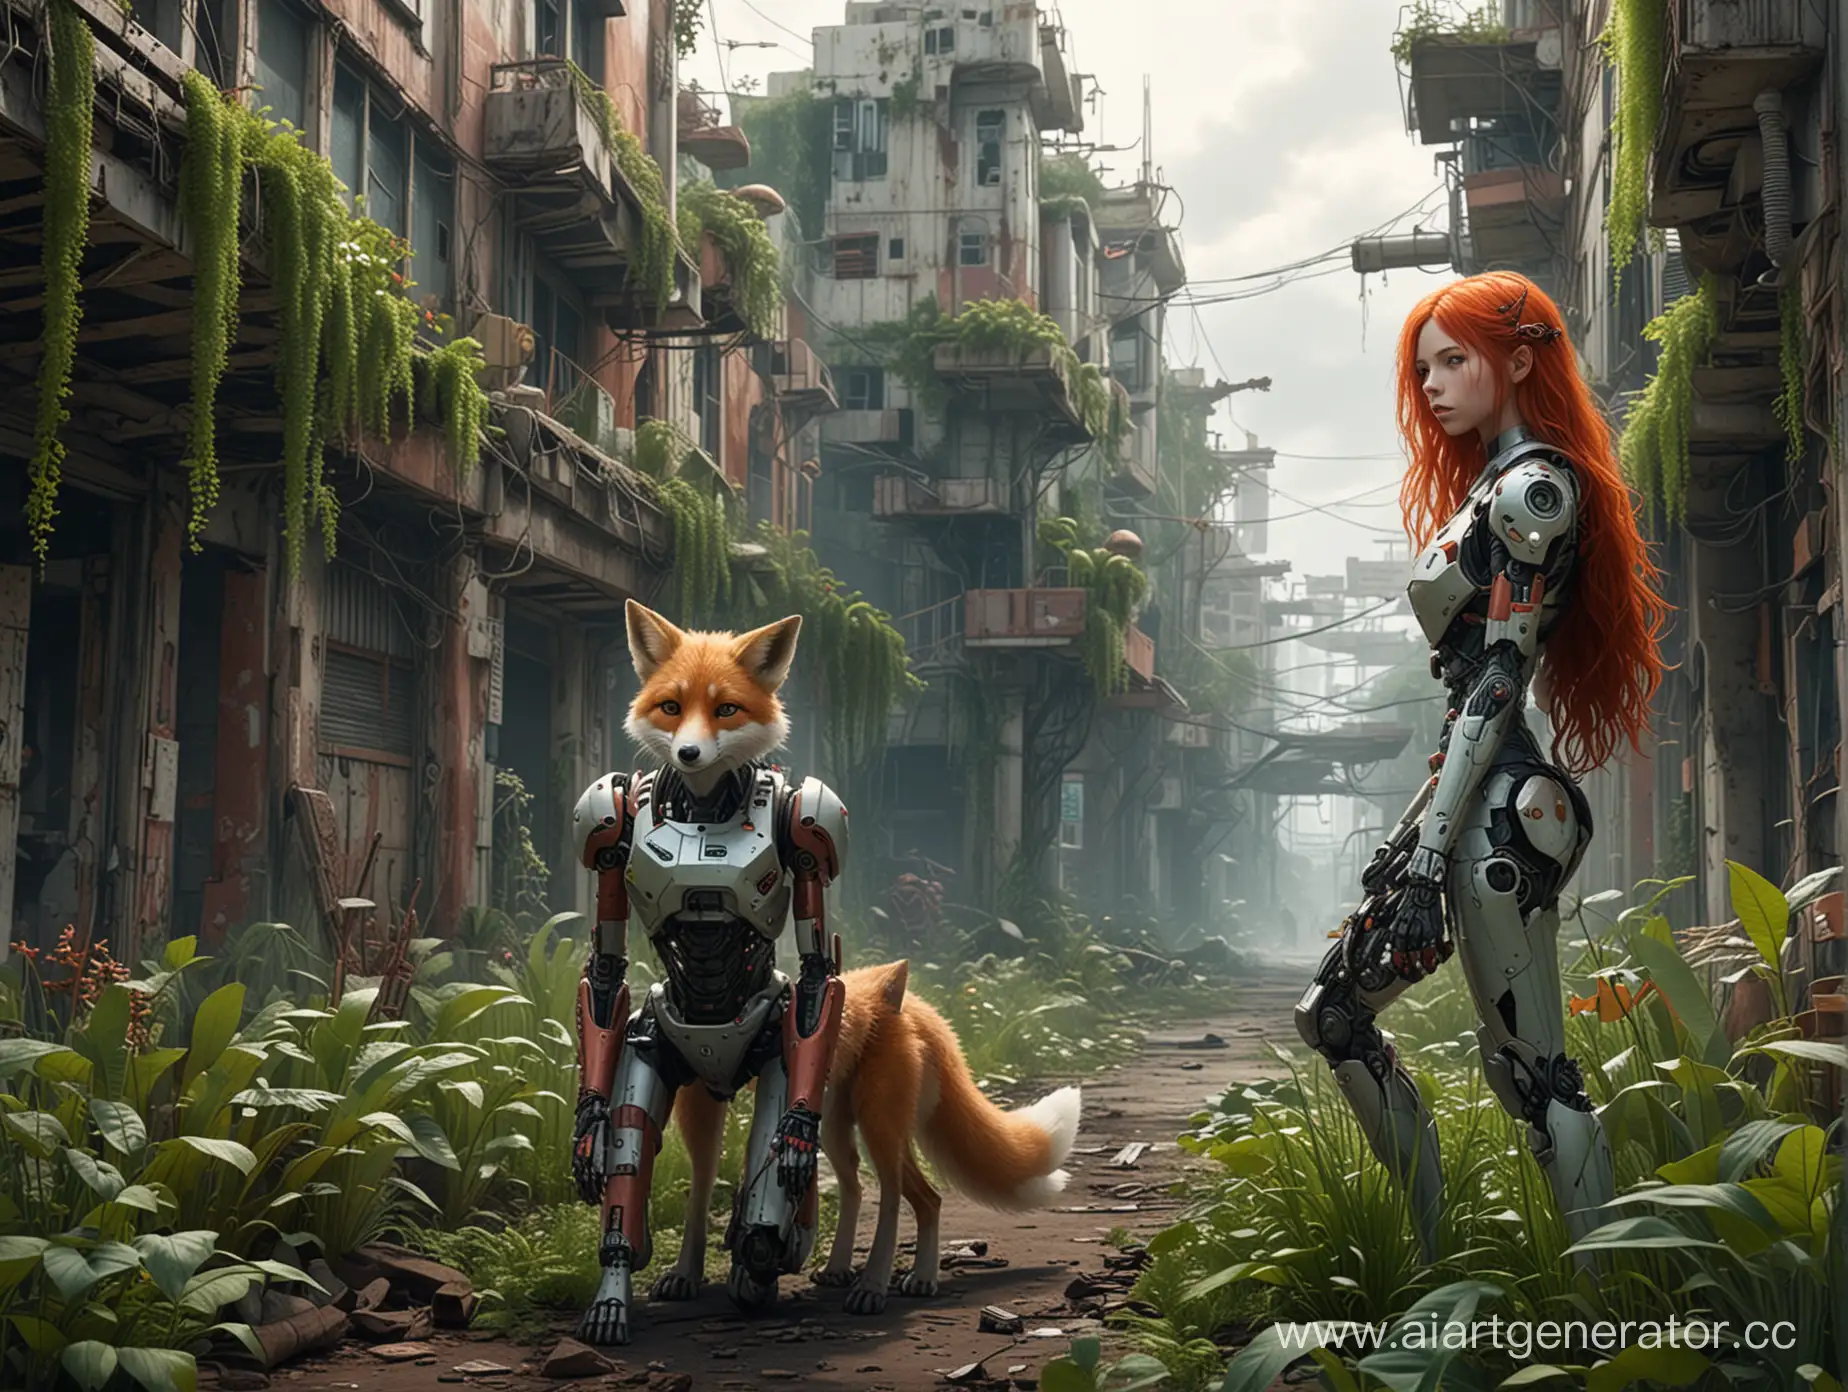 RedHaired-Cyborg-Girl-and-Pet-Fox-Robot-in-Overgrown-Abandoned-City